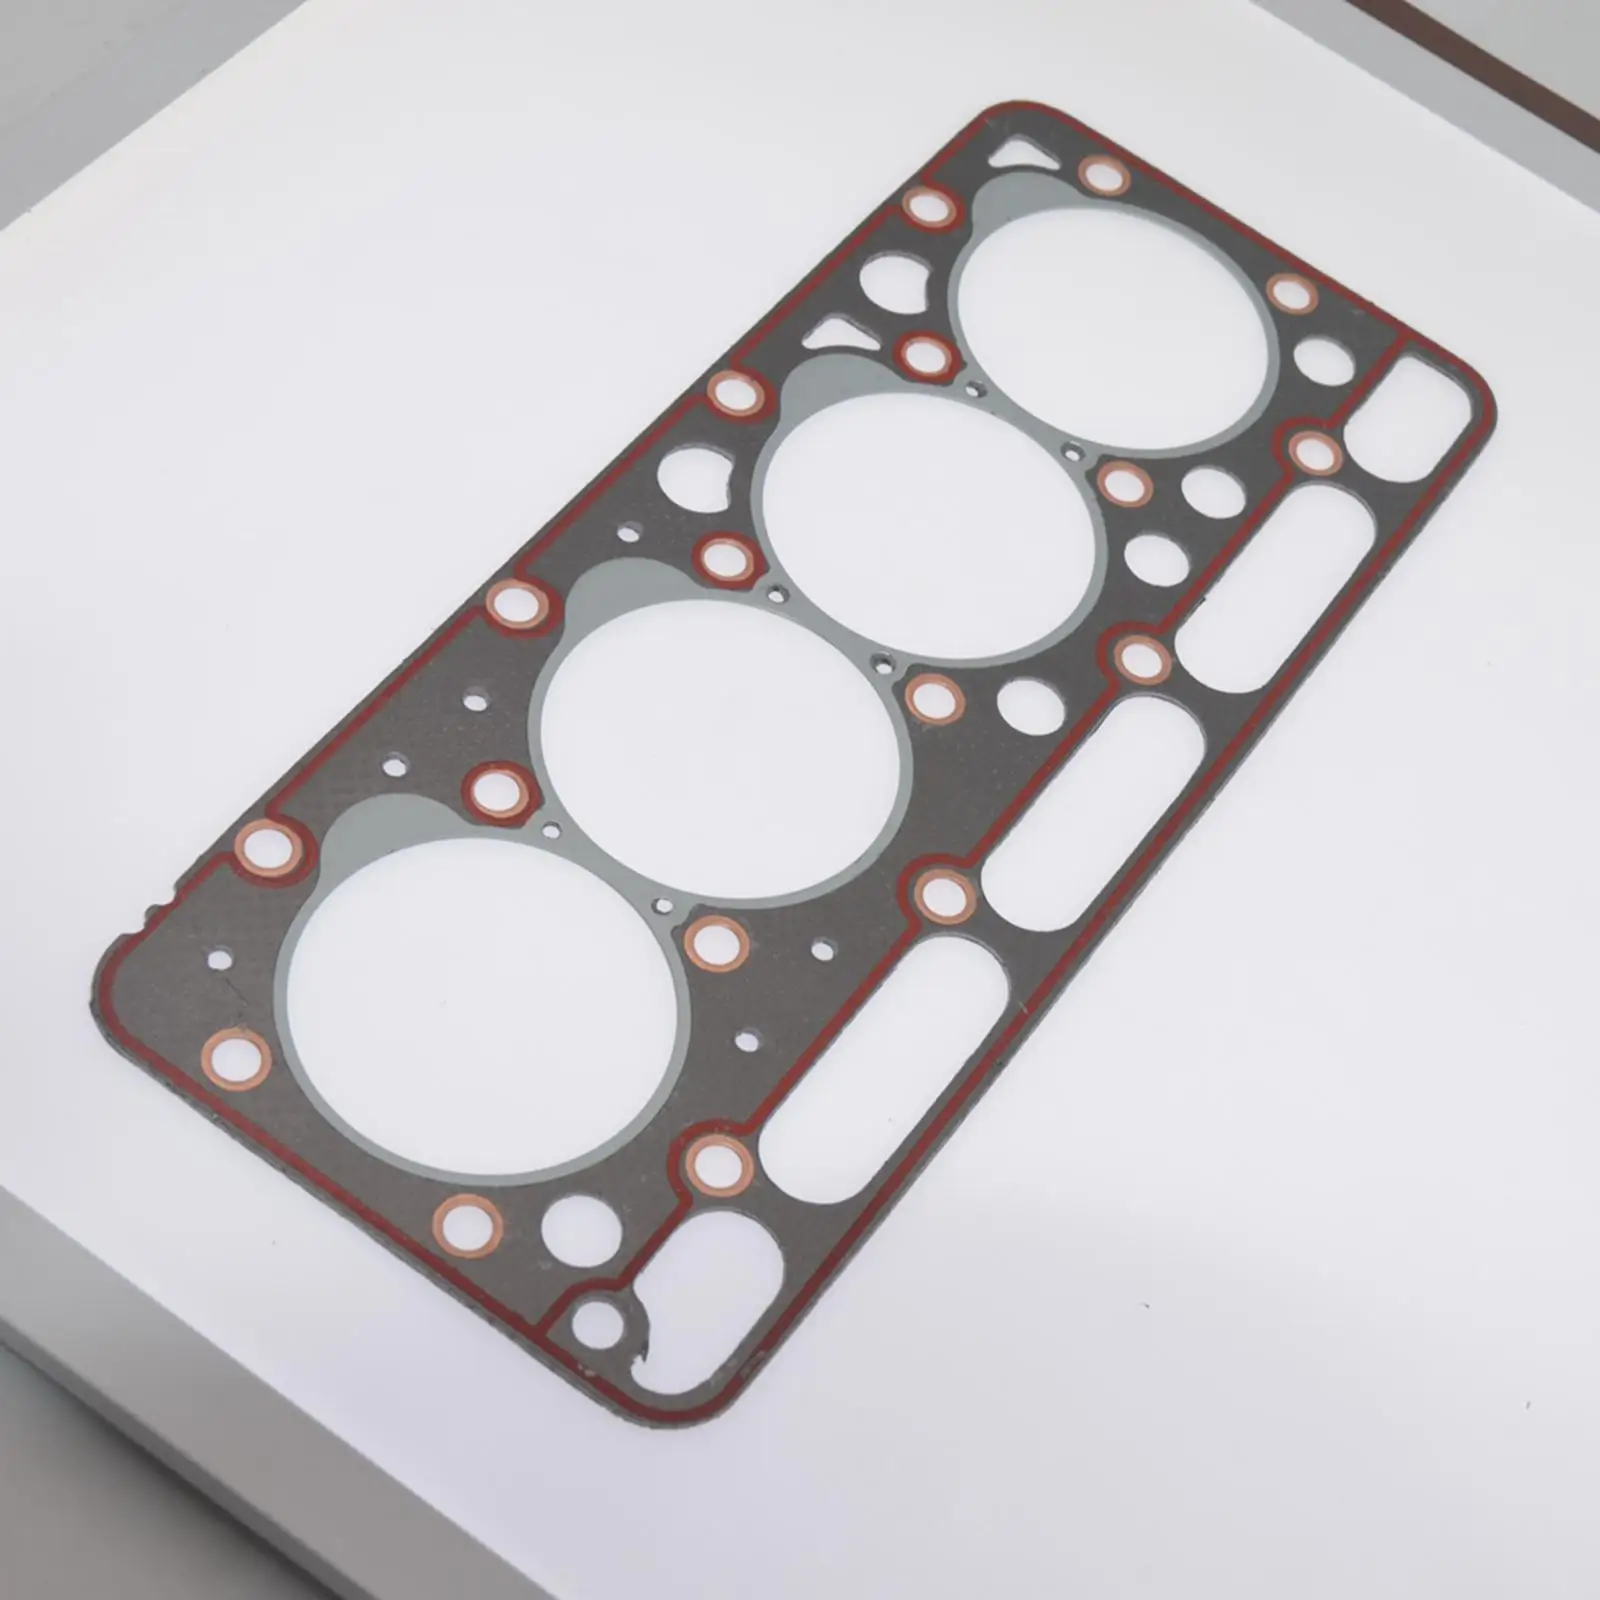 

19077-03310 Head Gasket Direct Replaces Durable High Quality Metal Easy to Install Composite for Kubota Bobcat V2203 V2403